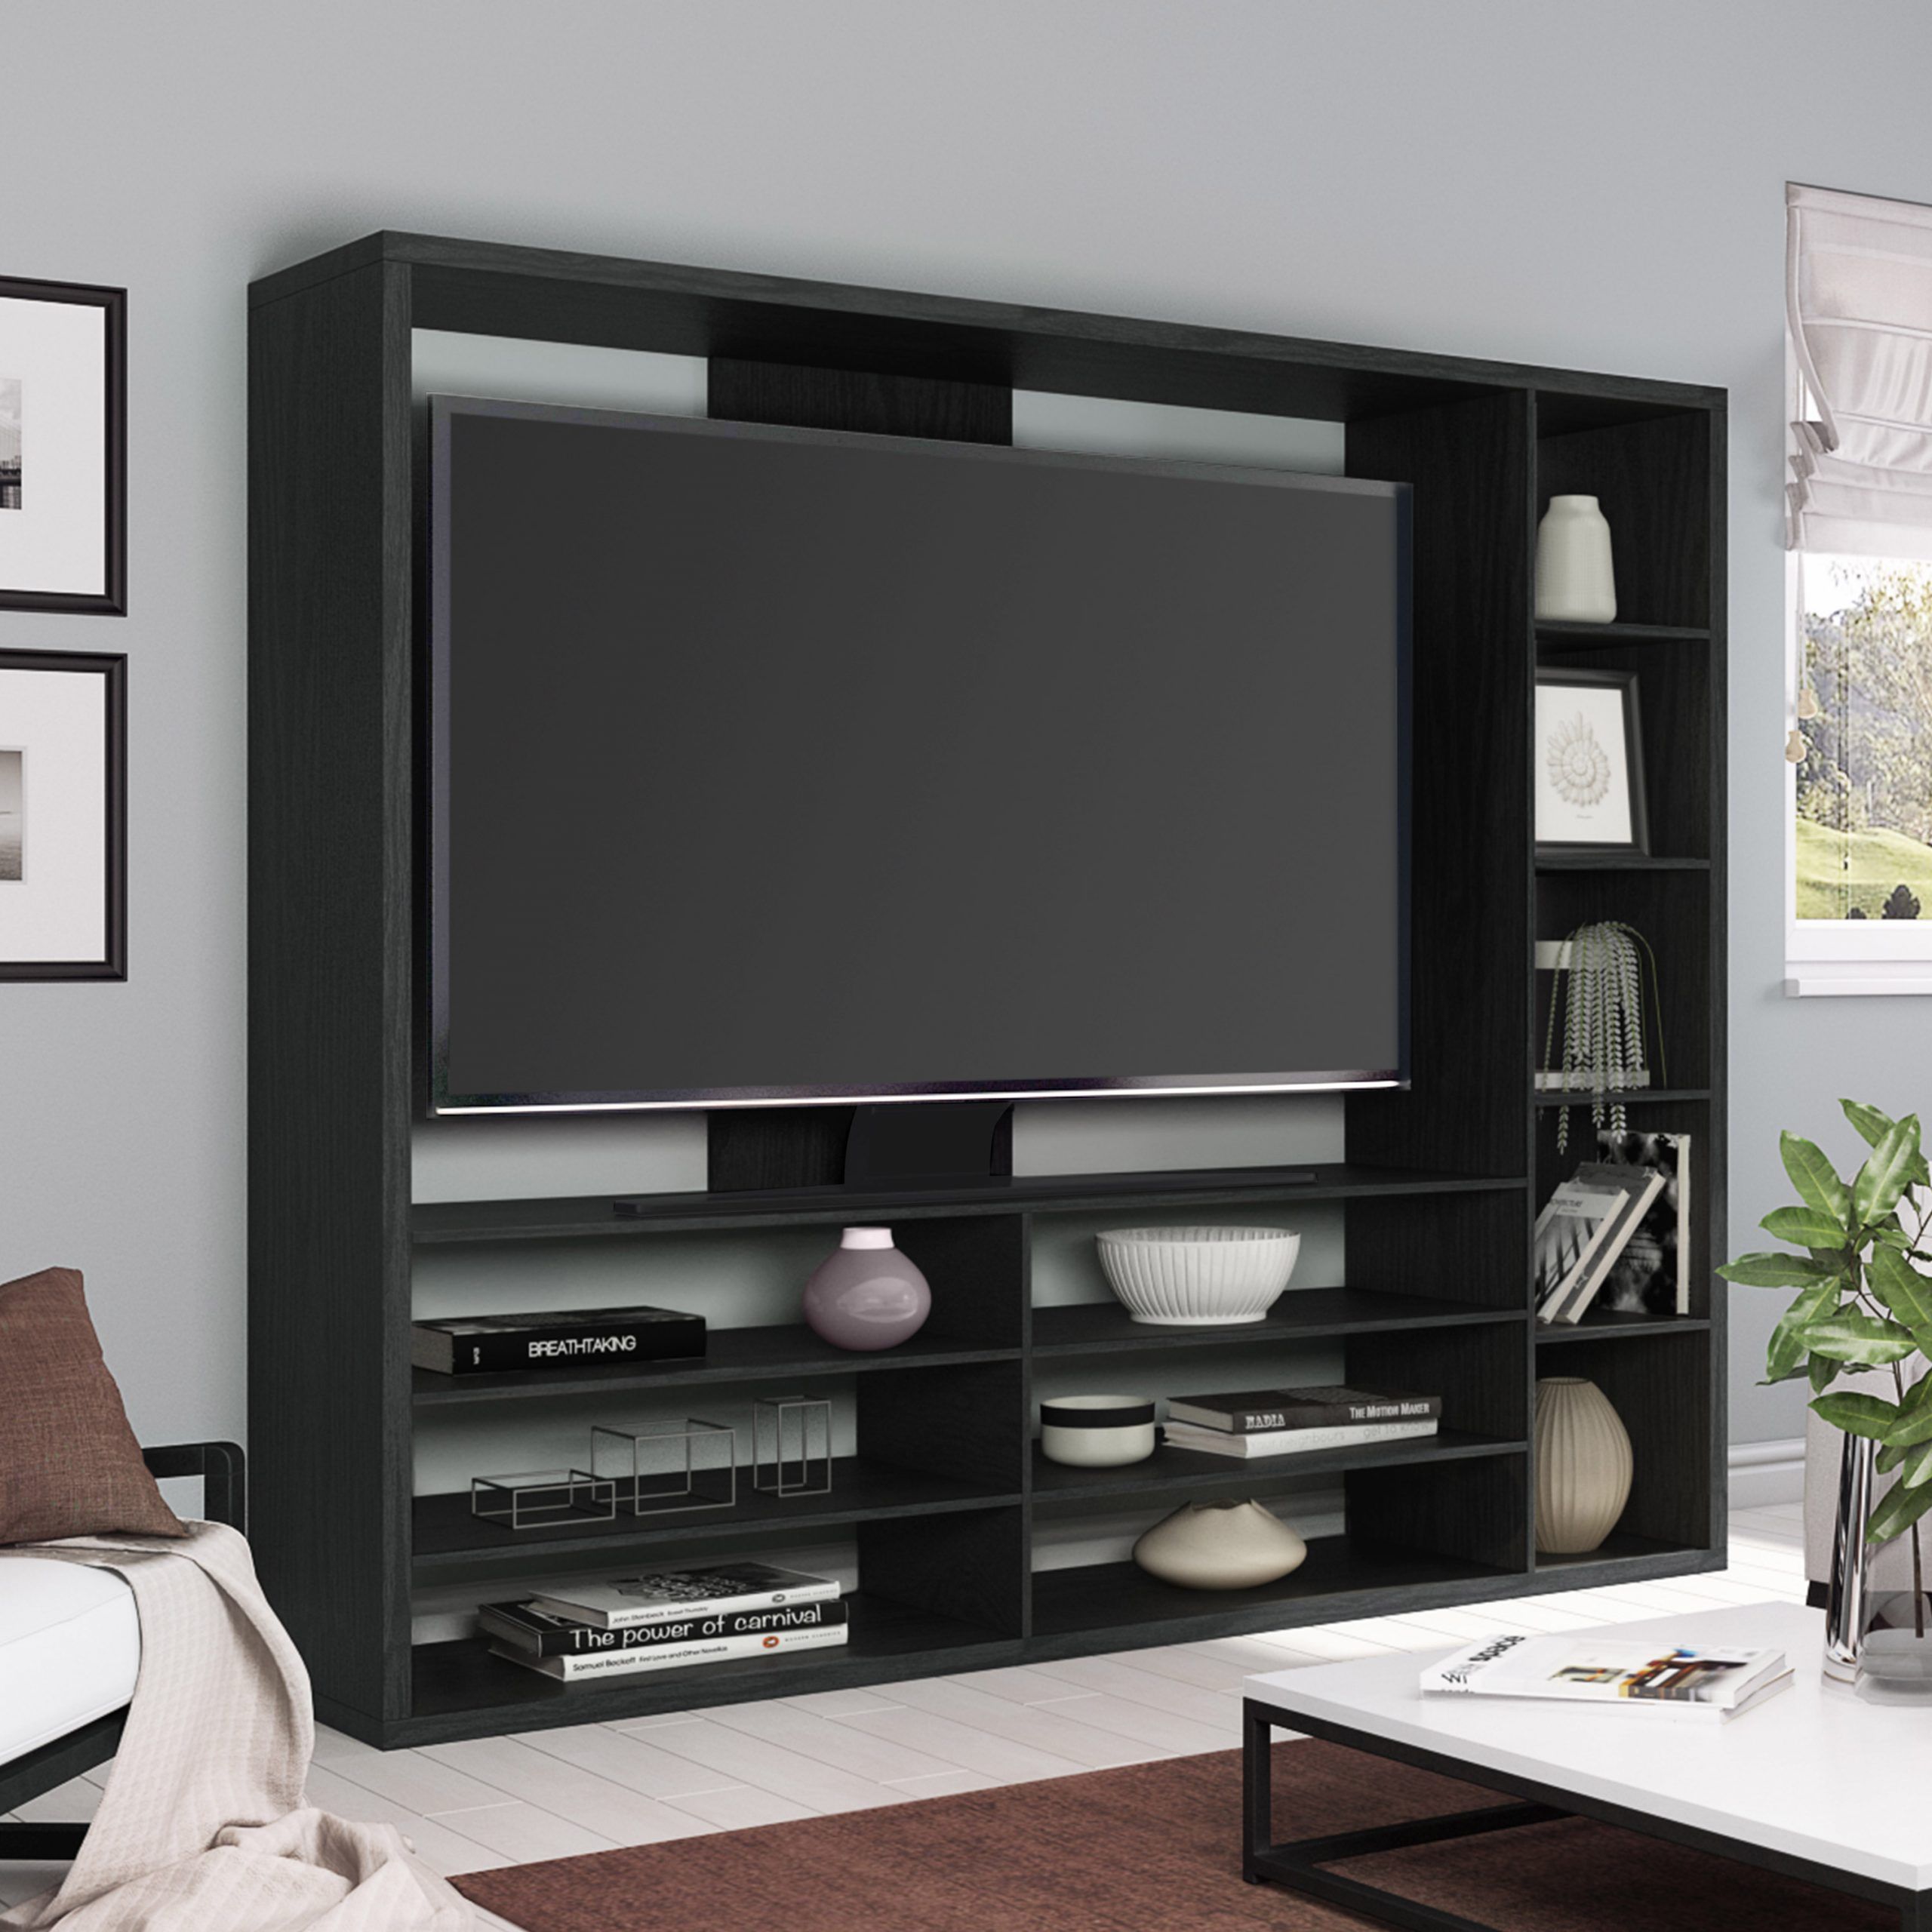 Entertainment Center Vs Tv Stand • Patio Ideas In Beam Through Tv Stand (Photo 6 of 15)